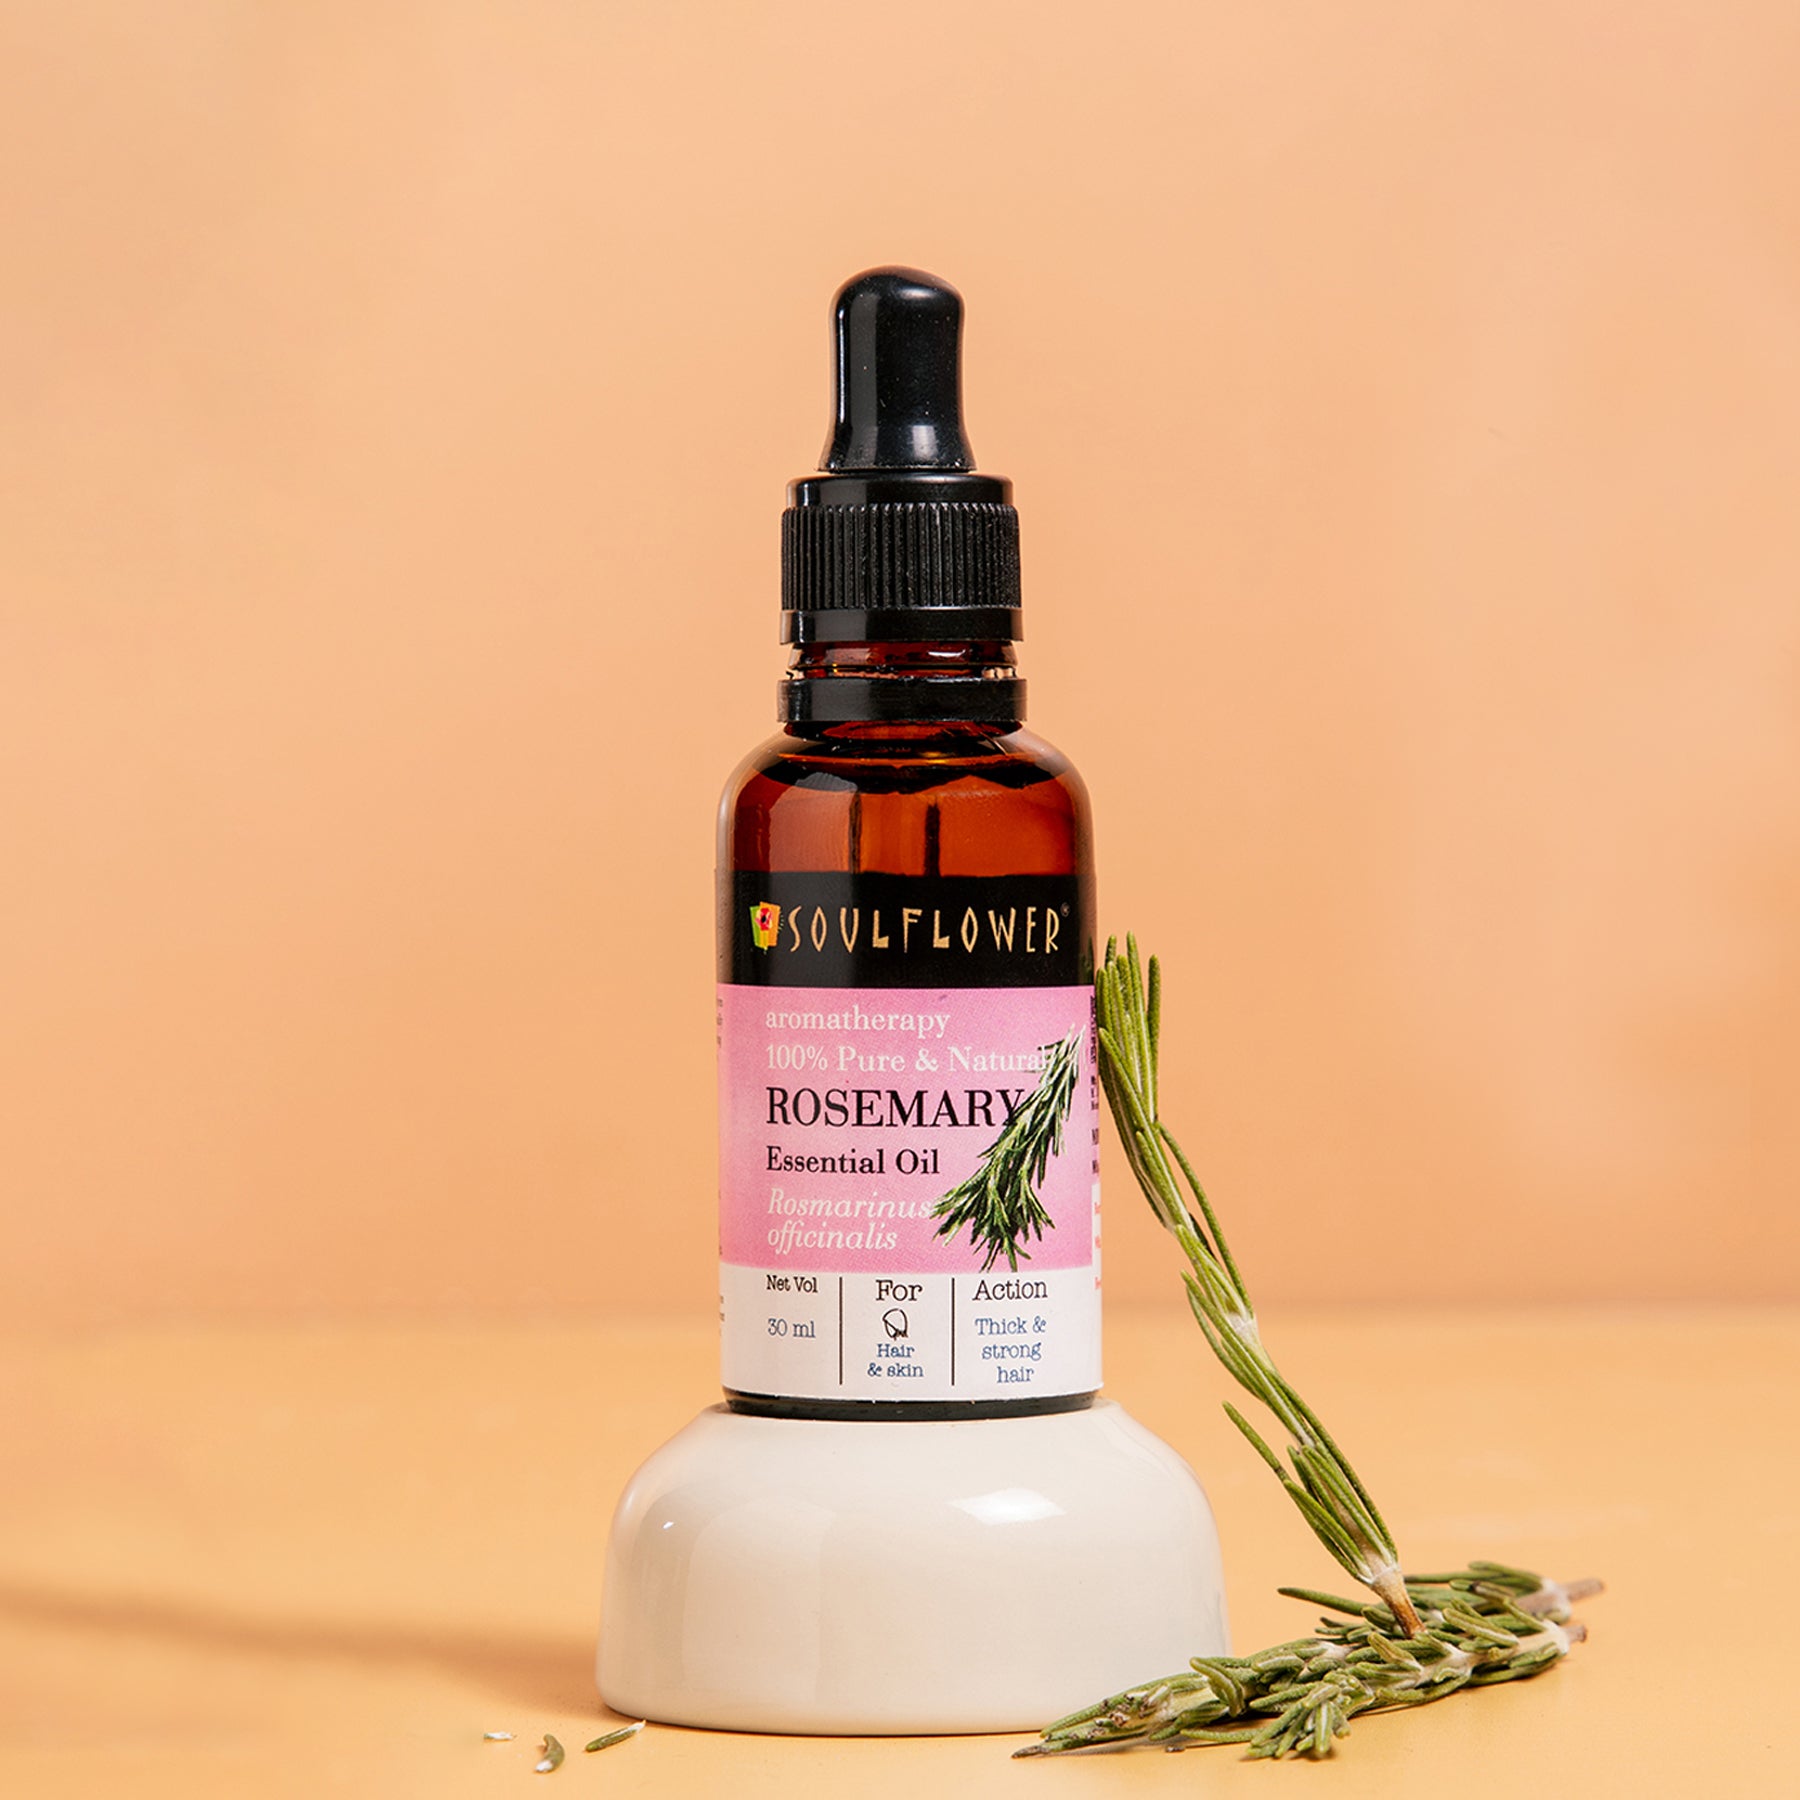 The Ultimate Guide: How to Use Soulflower Rosemary Essential Oil for Hair Growth